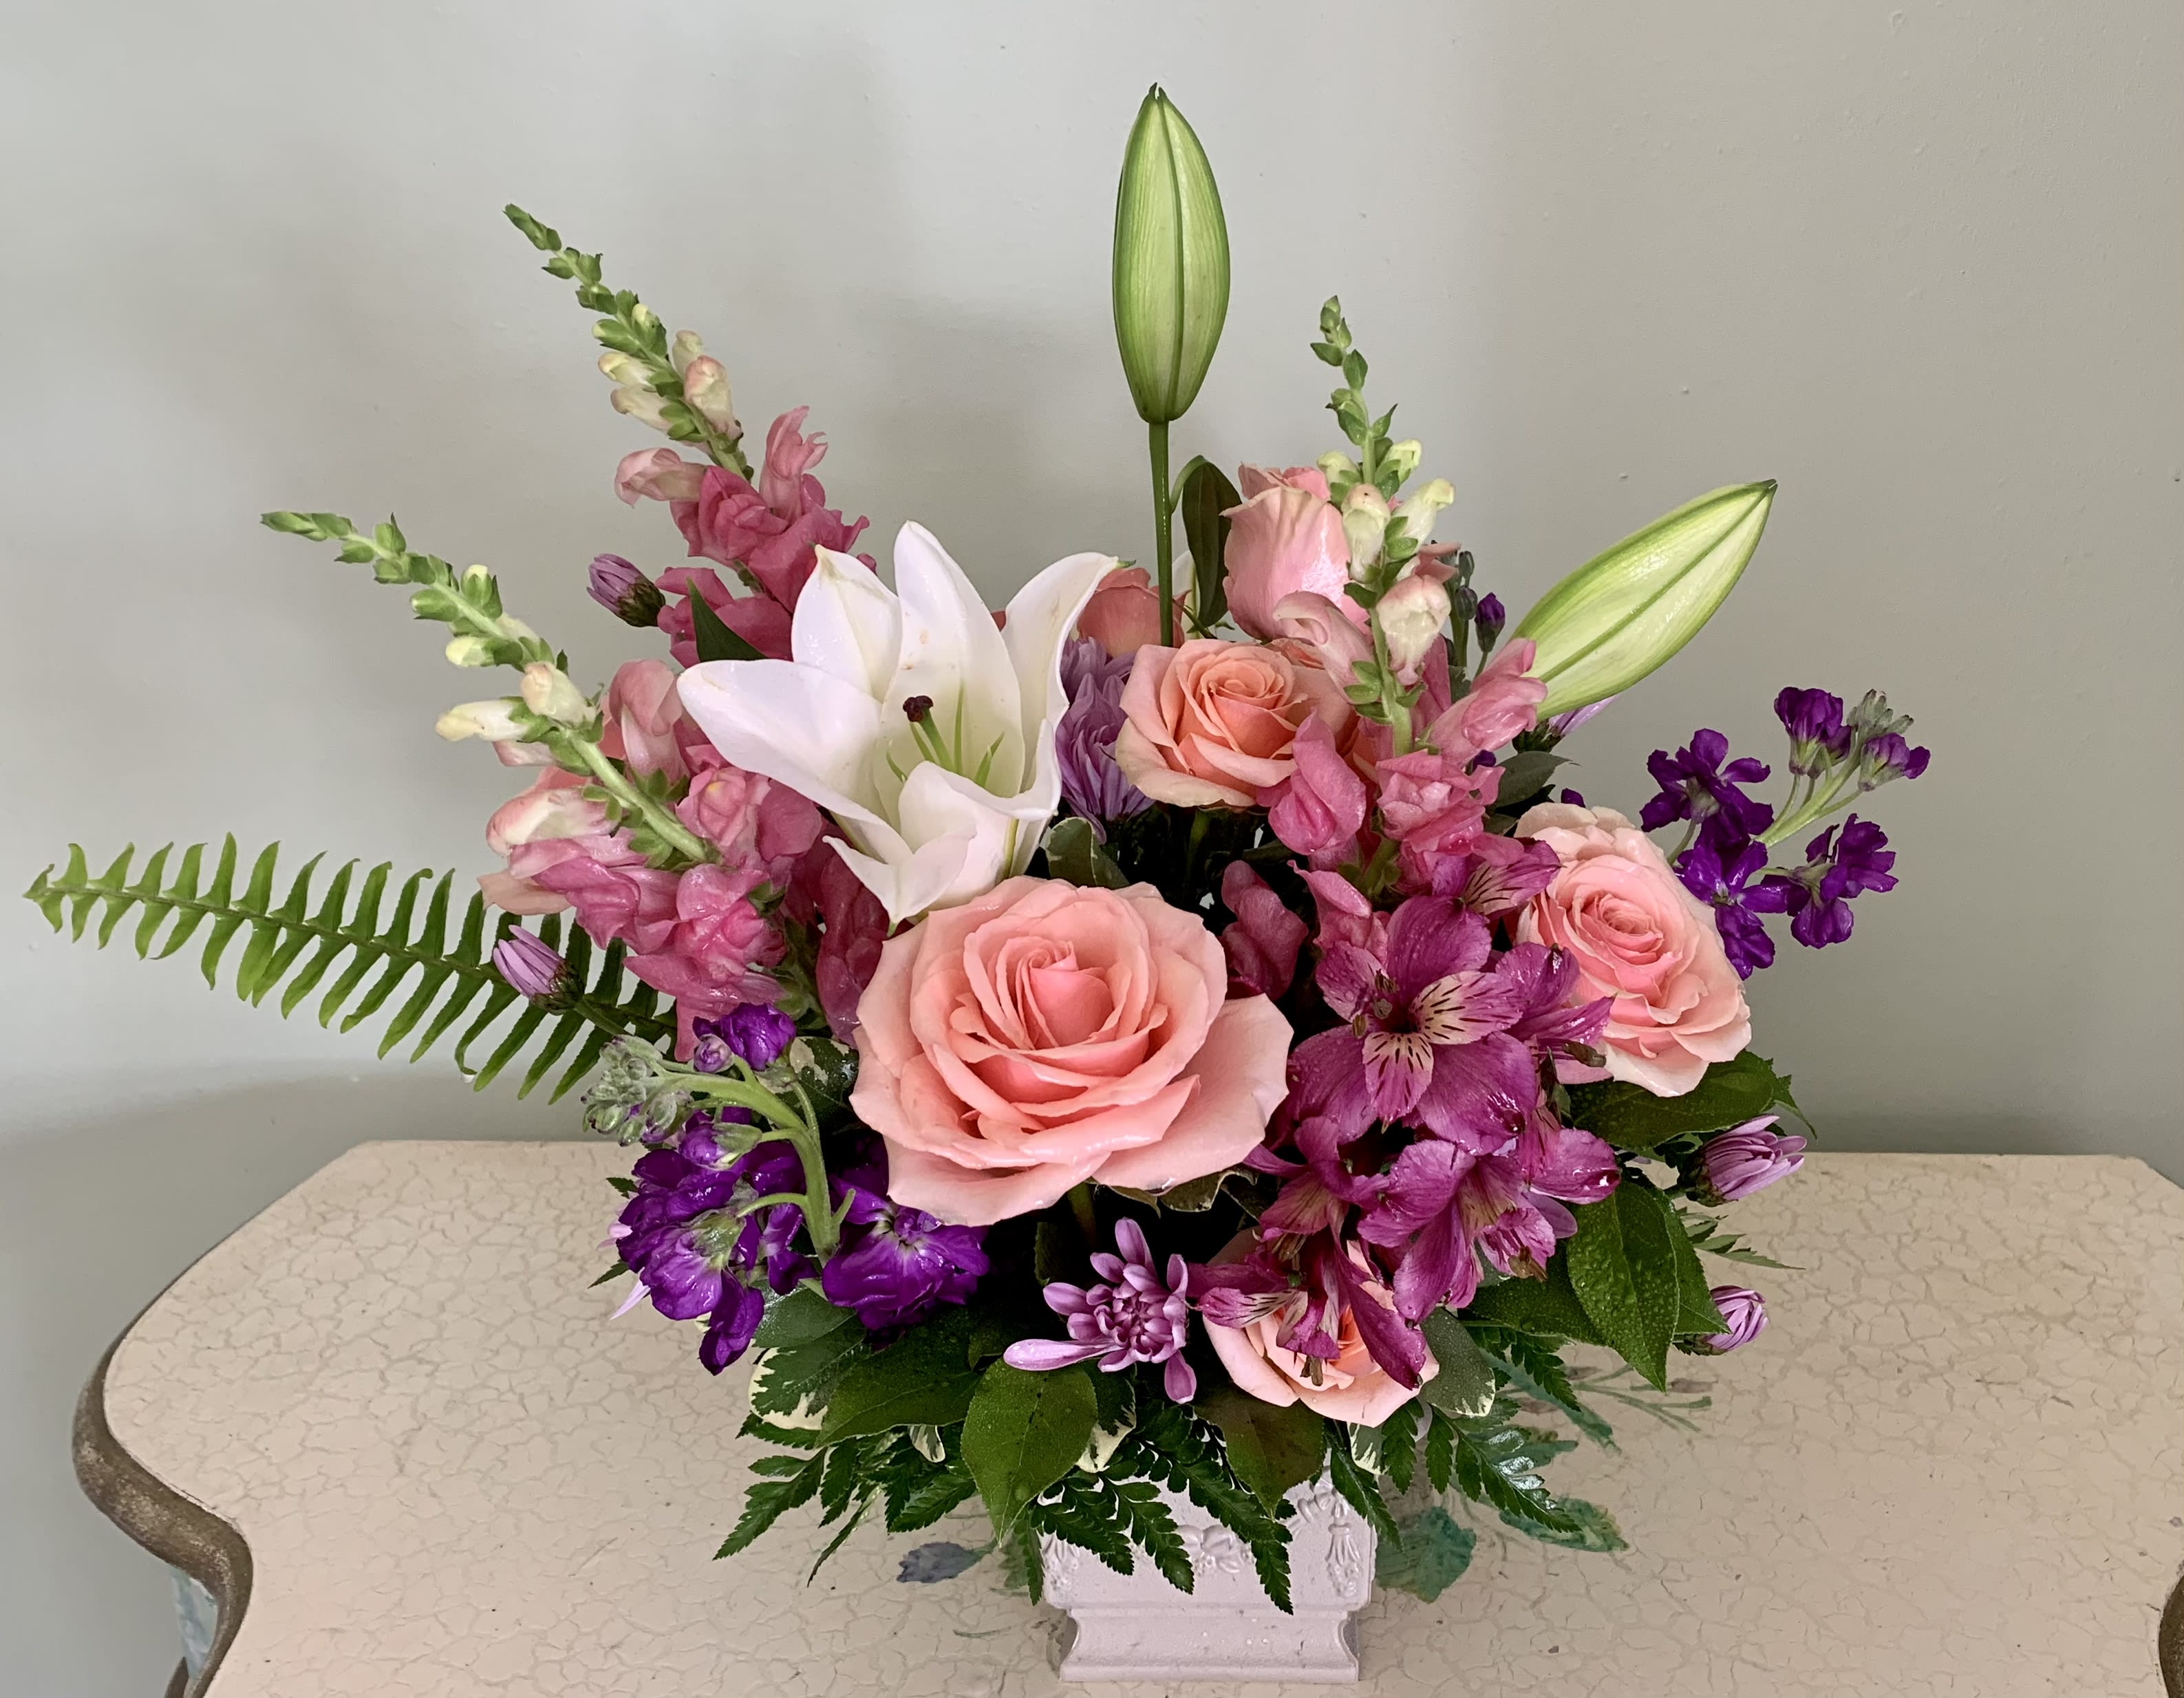 Pastel Sherbet Love - A soft pastel arrangement that shows someone special how much they are loved. 